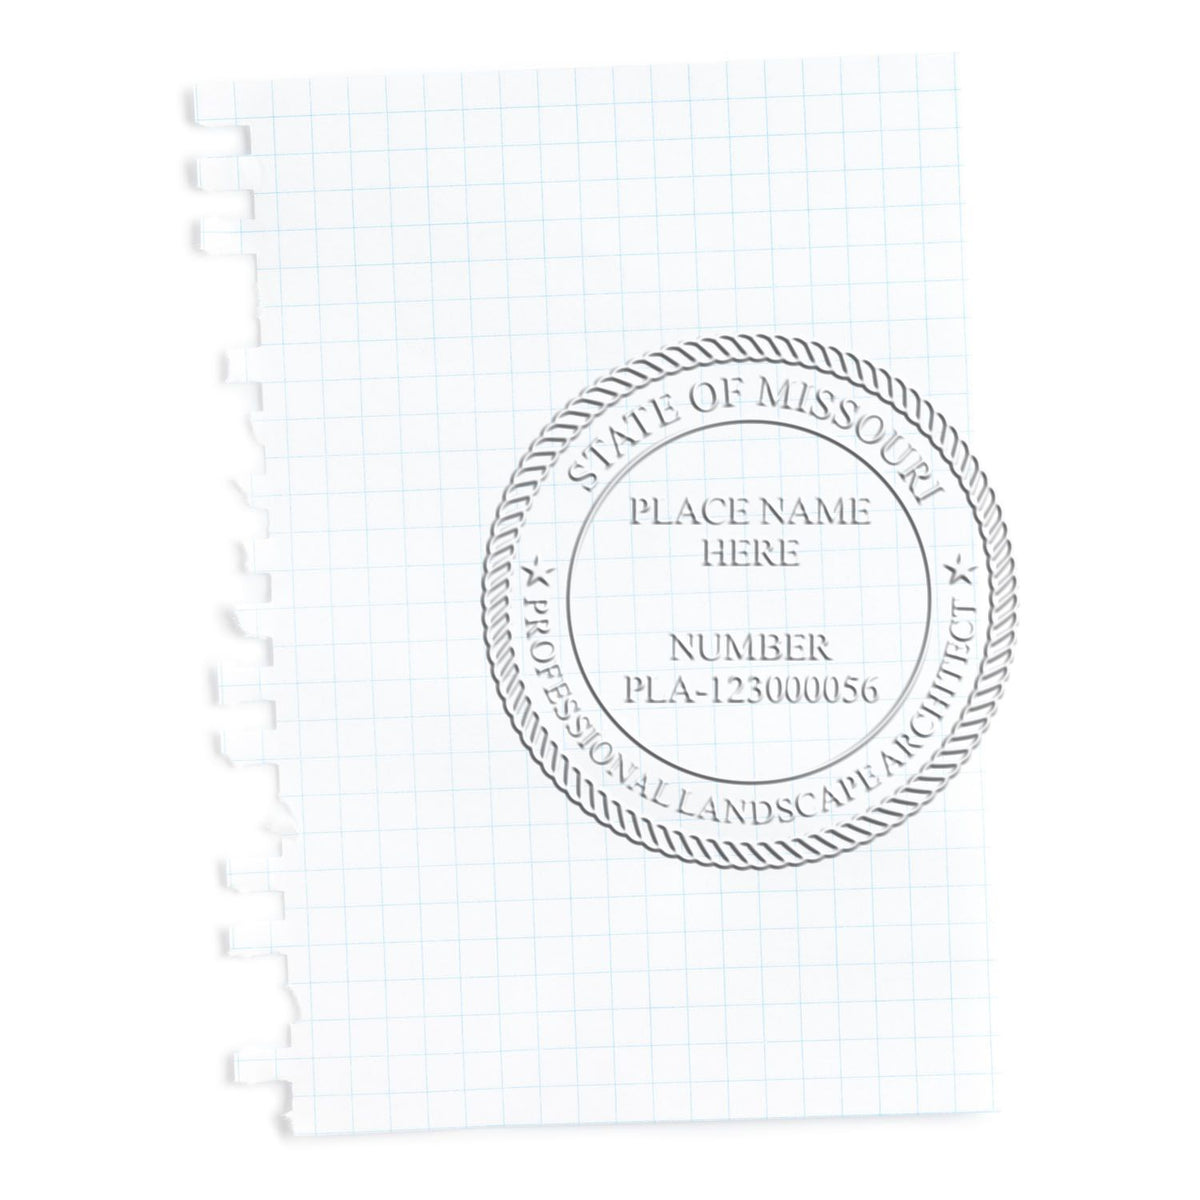 Another Example of a stamped impression of the Hybrid Missouri Landscape Architect Seal on a office form